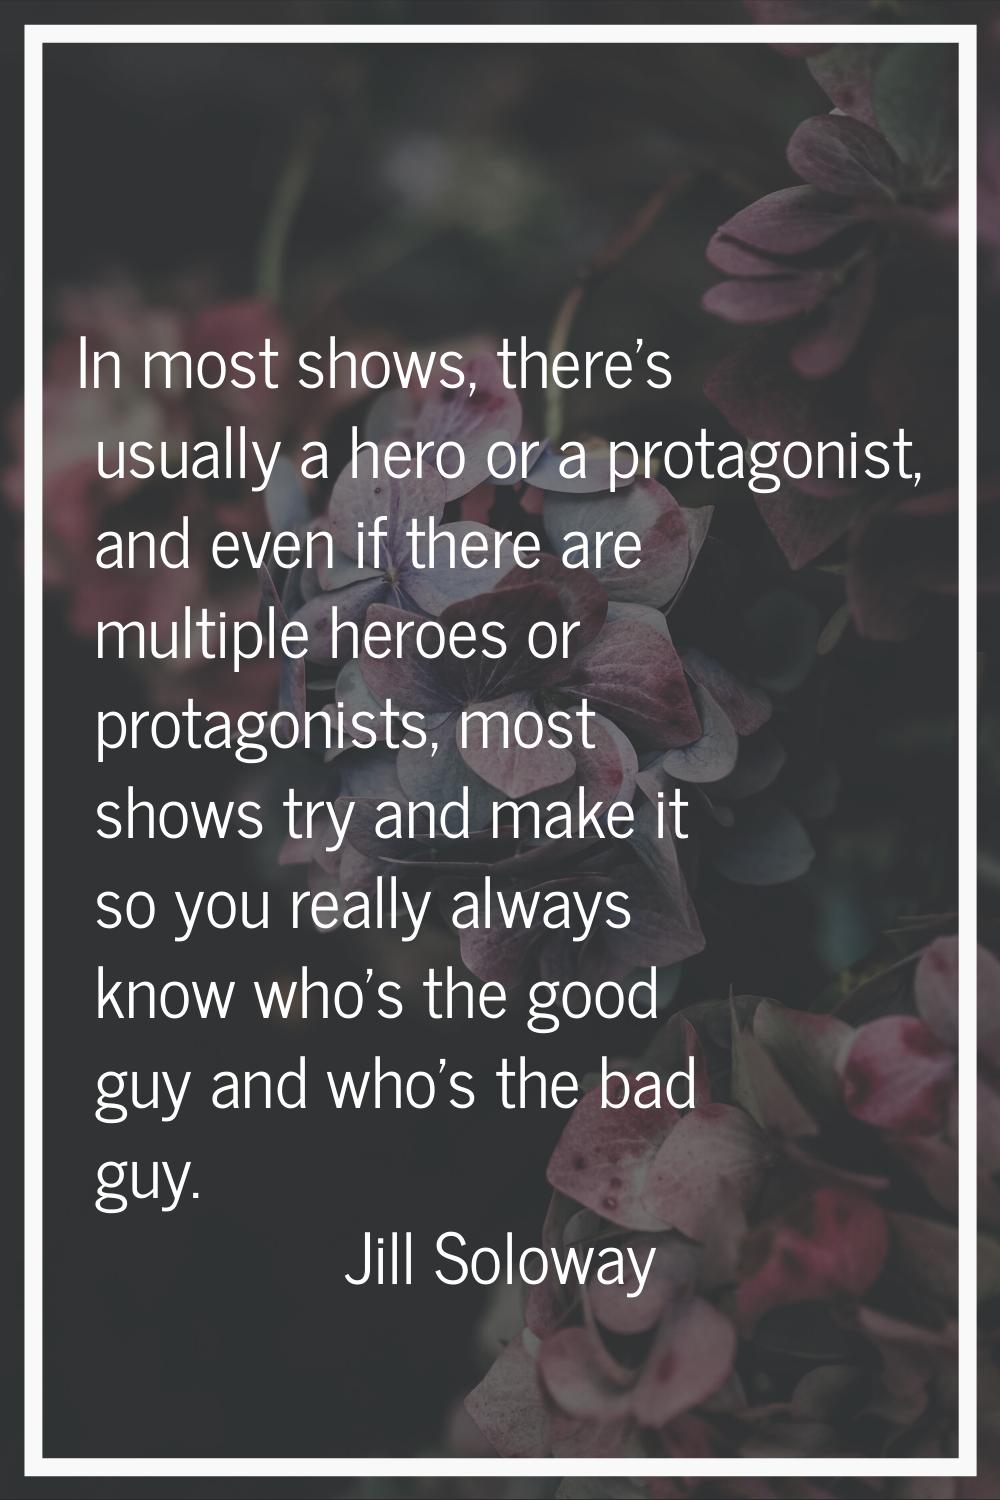 In most shows, there's usually a hero or a protagonist, and even if there are multiple heroes or pr